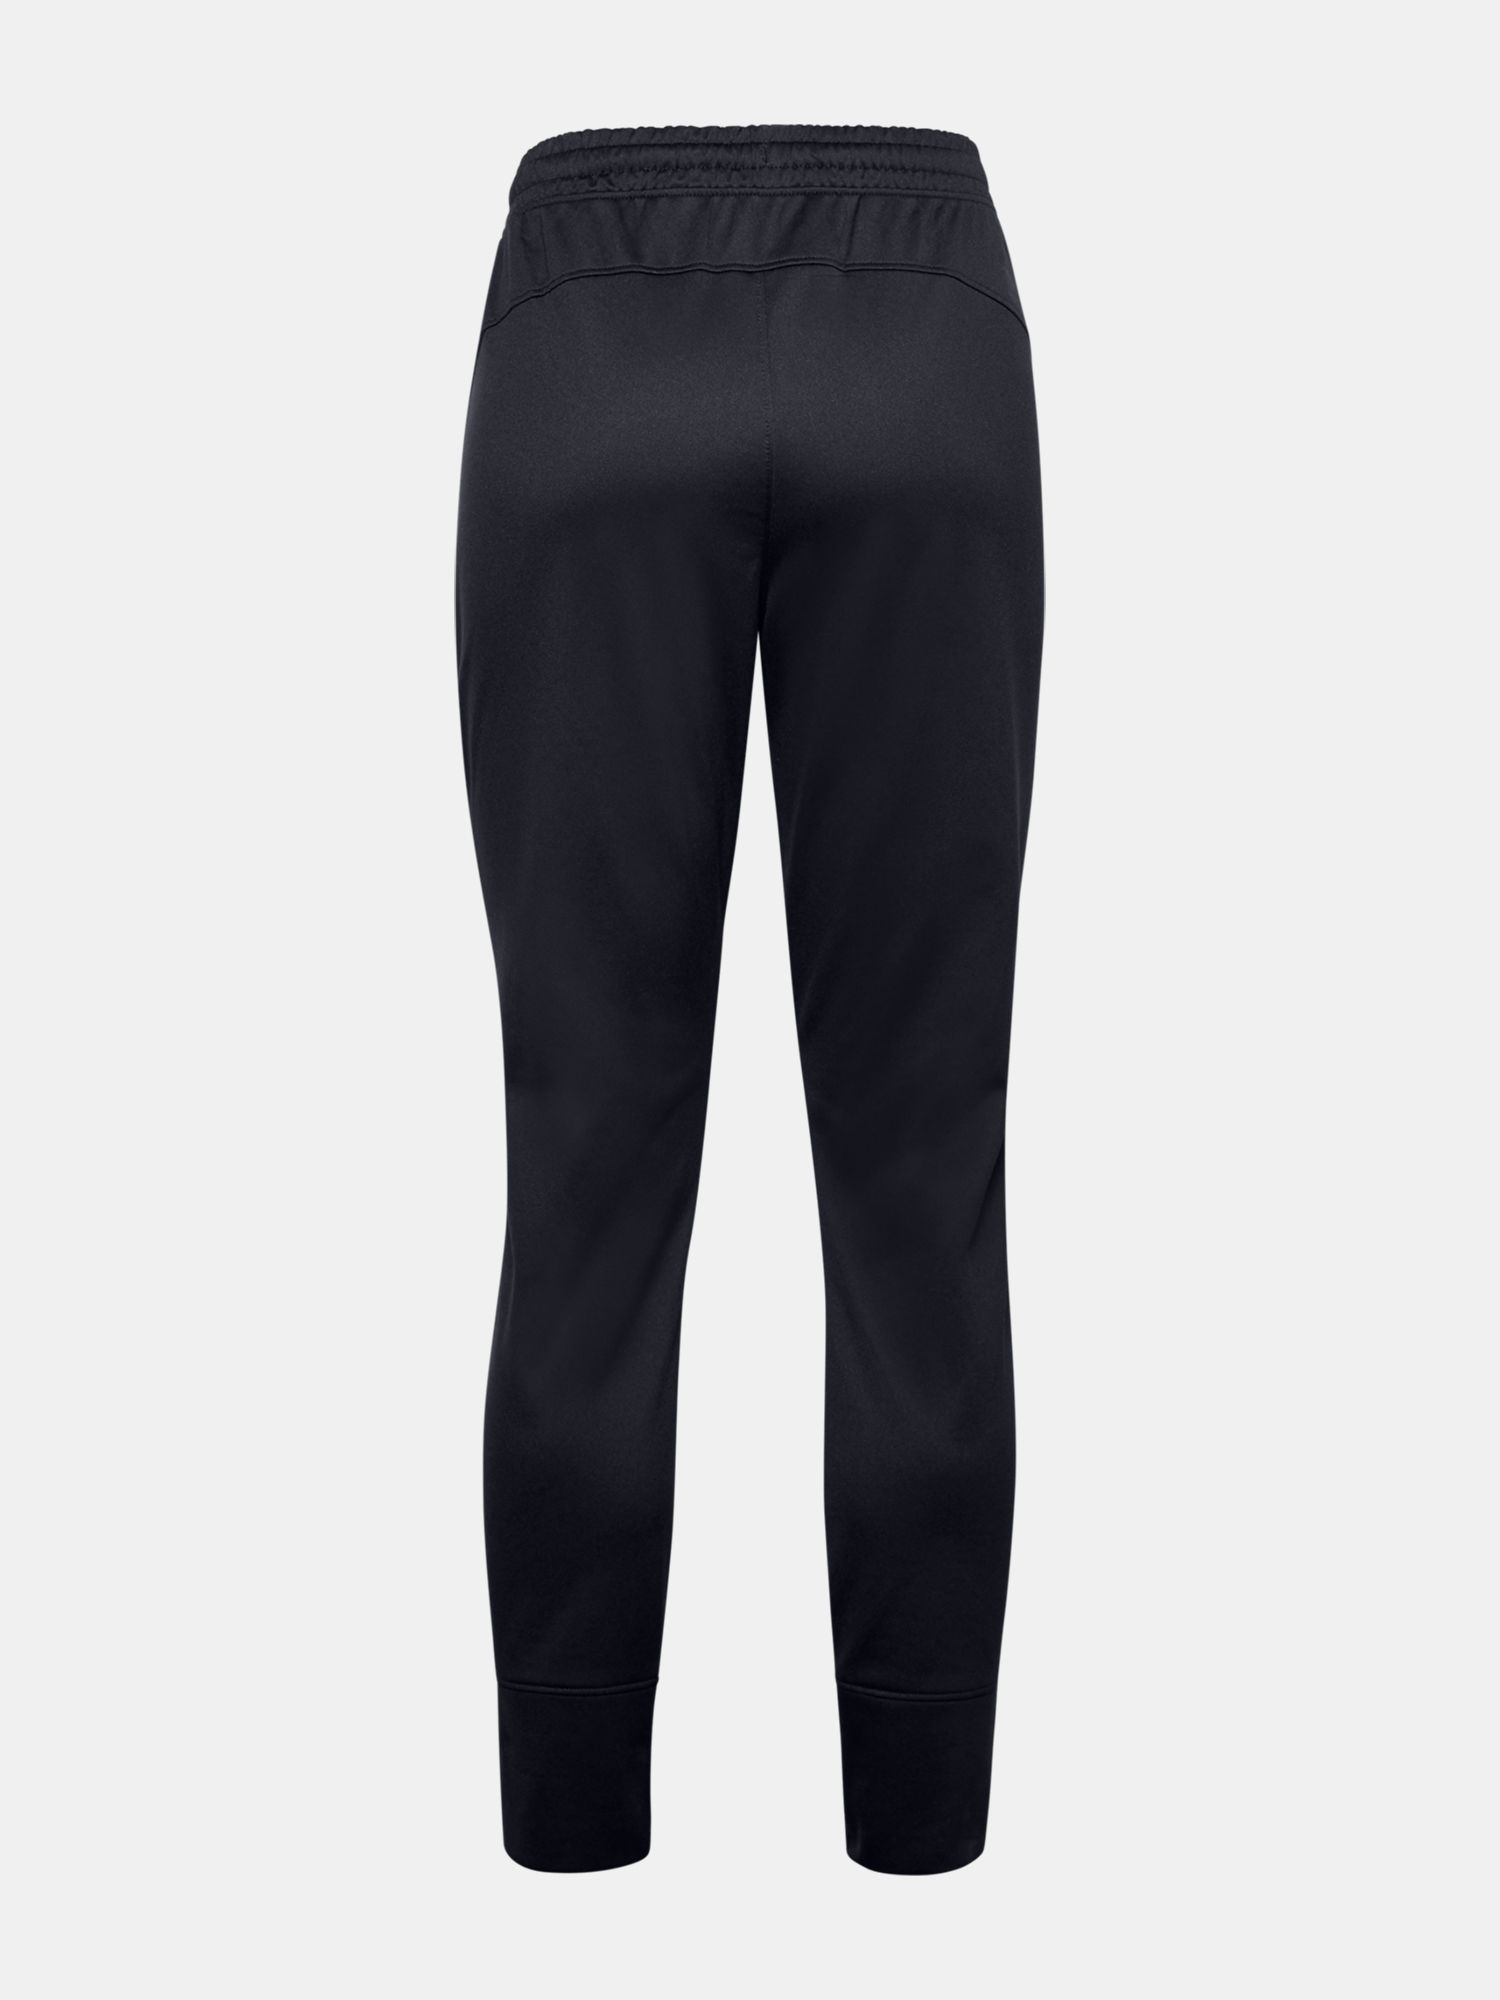 Kalhoty Under Armour Recover Fleece Pants-BLK (4)